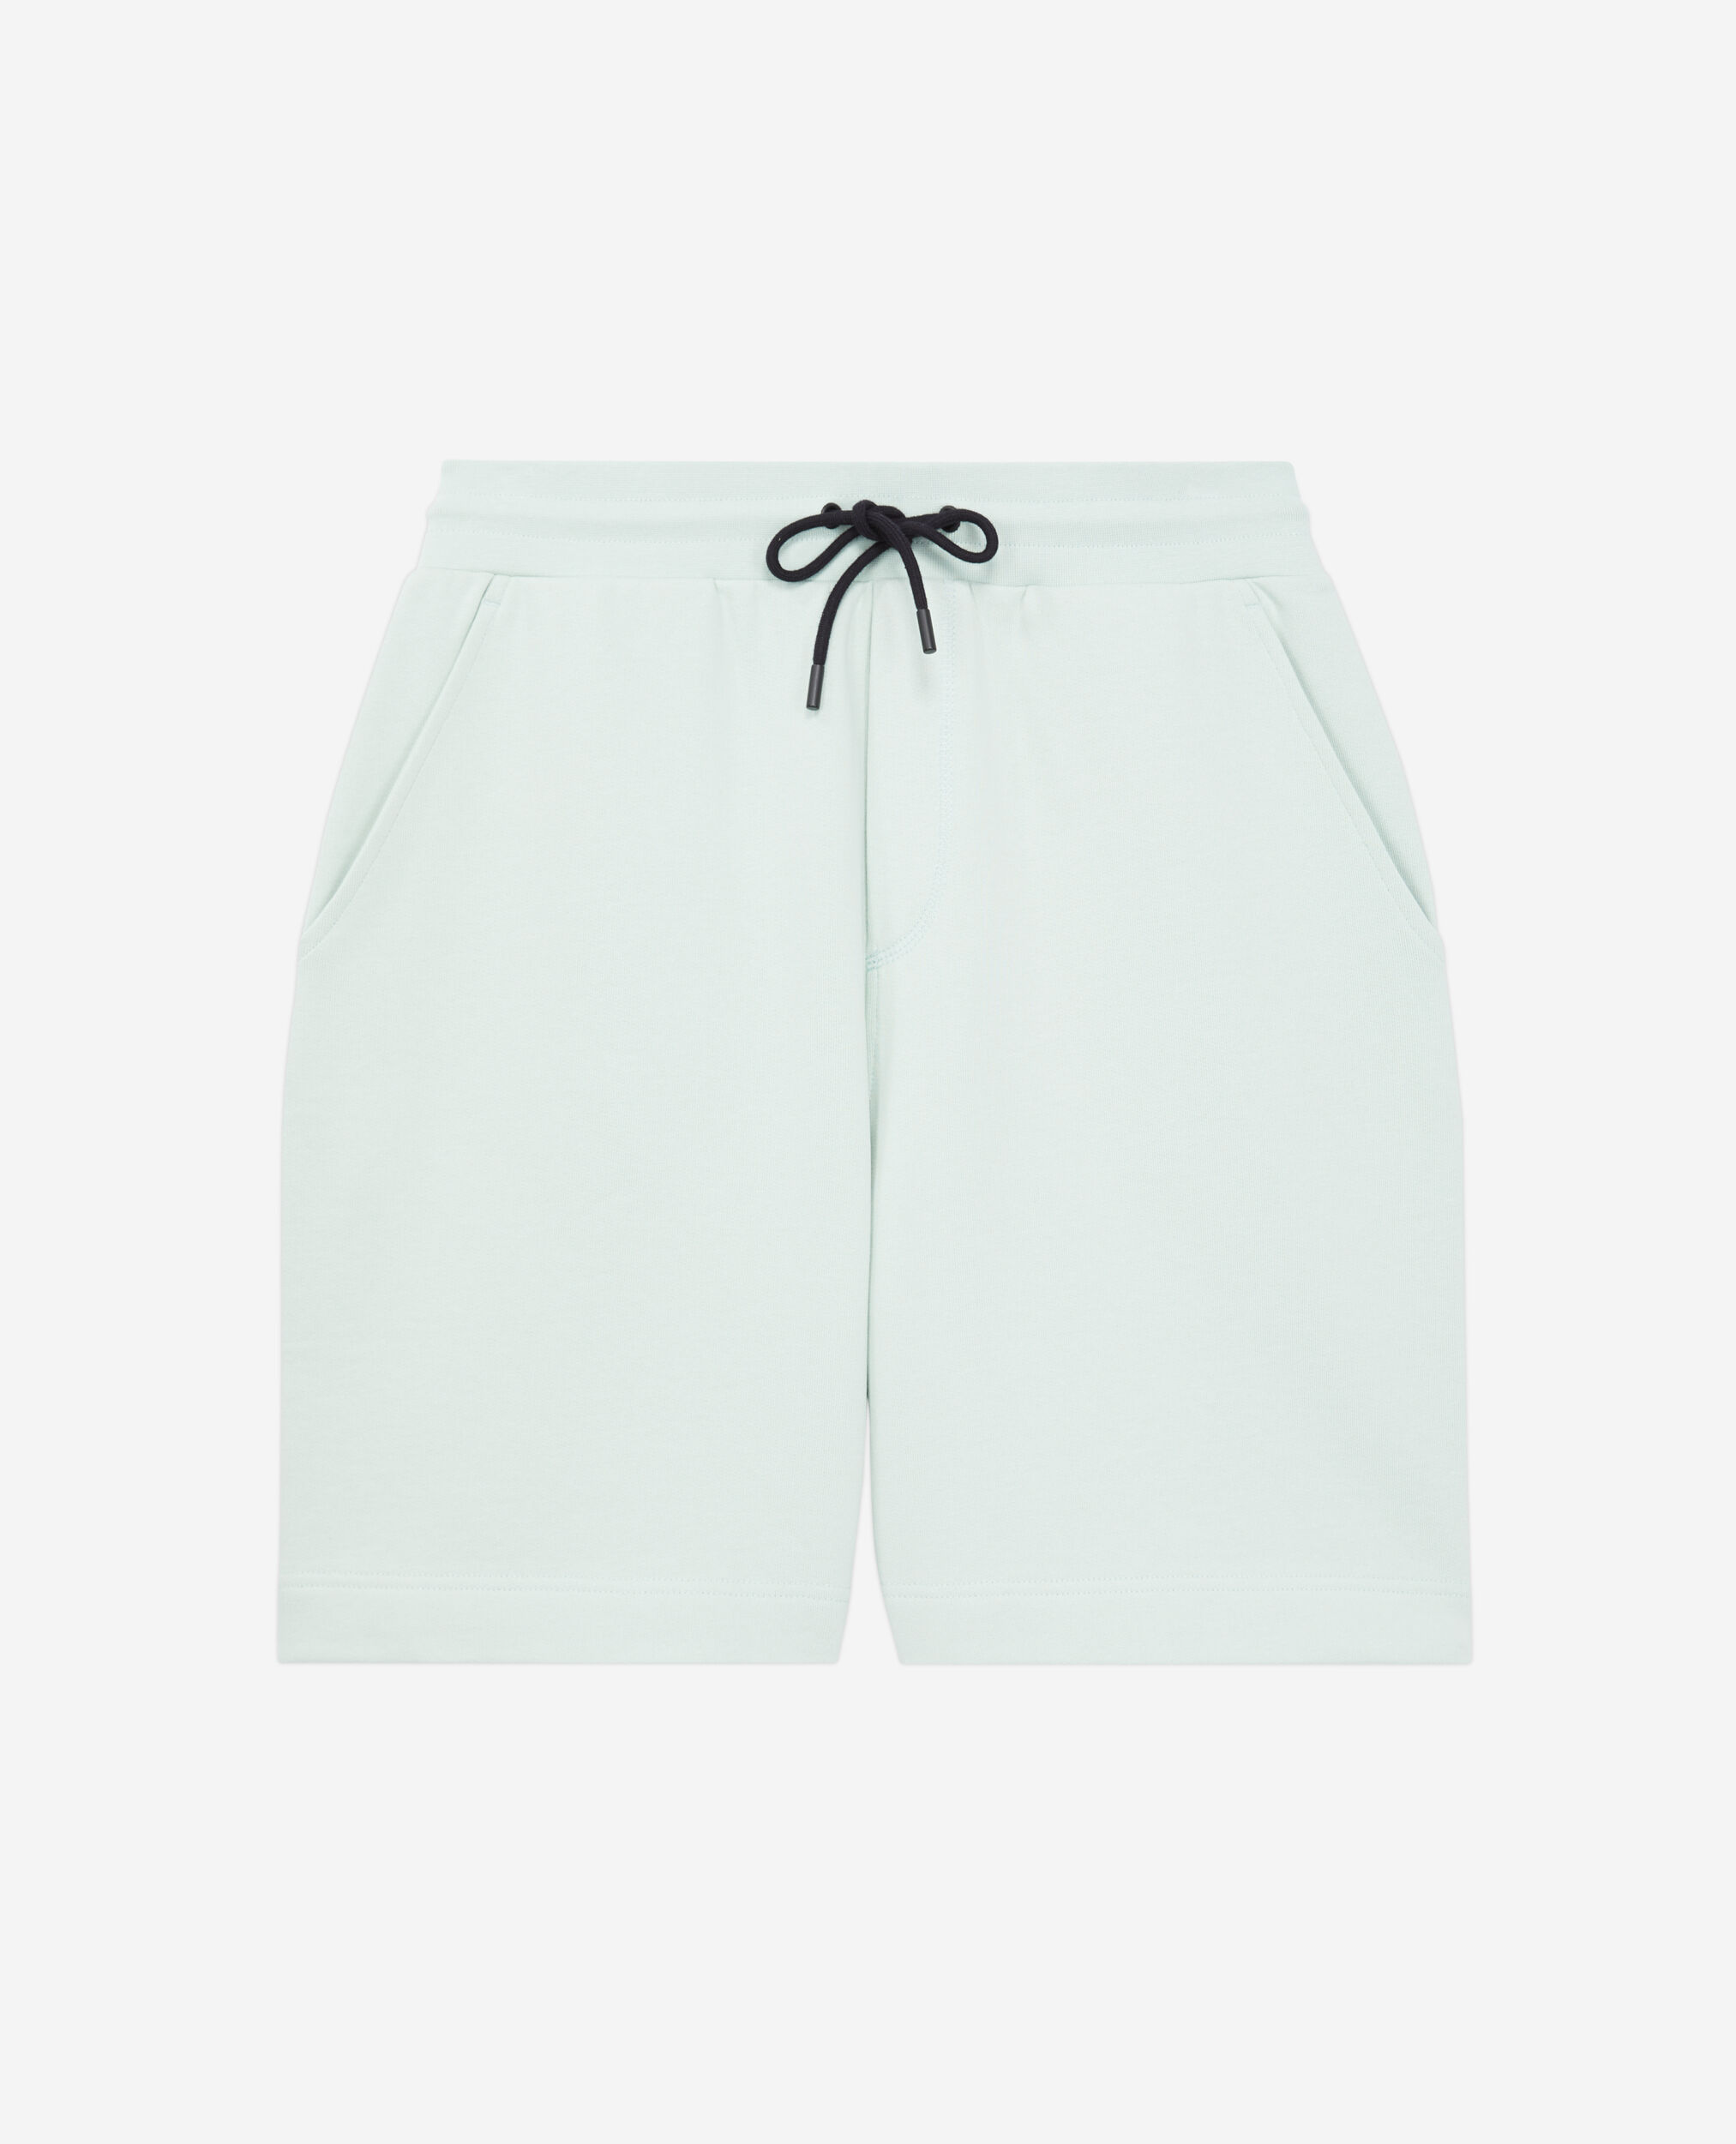 Green cotton shorts, OCEAN, hi-res image number null